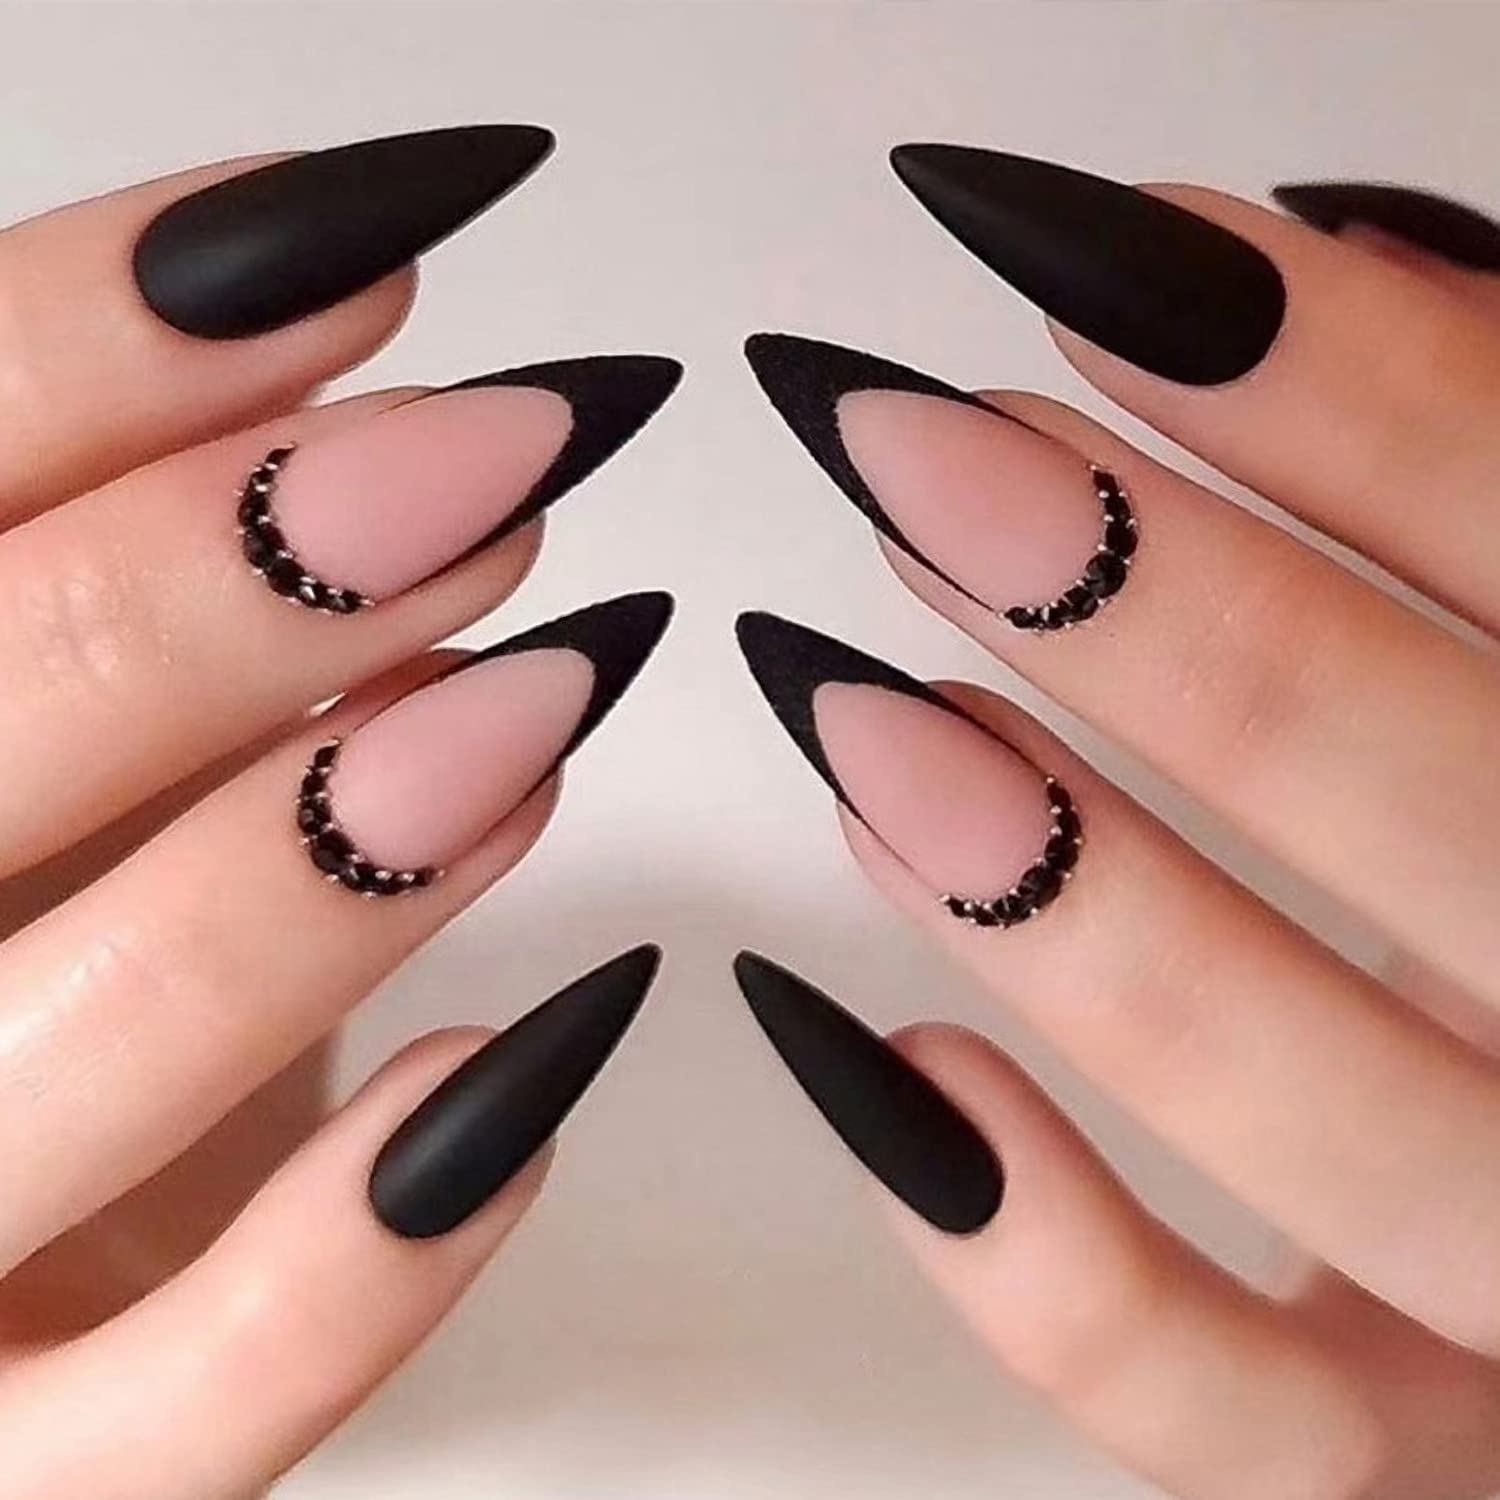 Stylish Nail Art Design Ideas To Wear in 2021 : Black, nude and white  French Tips